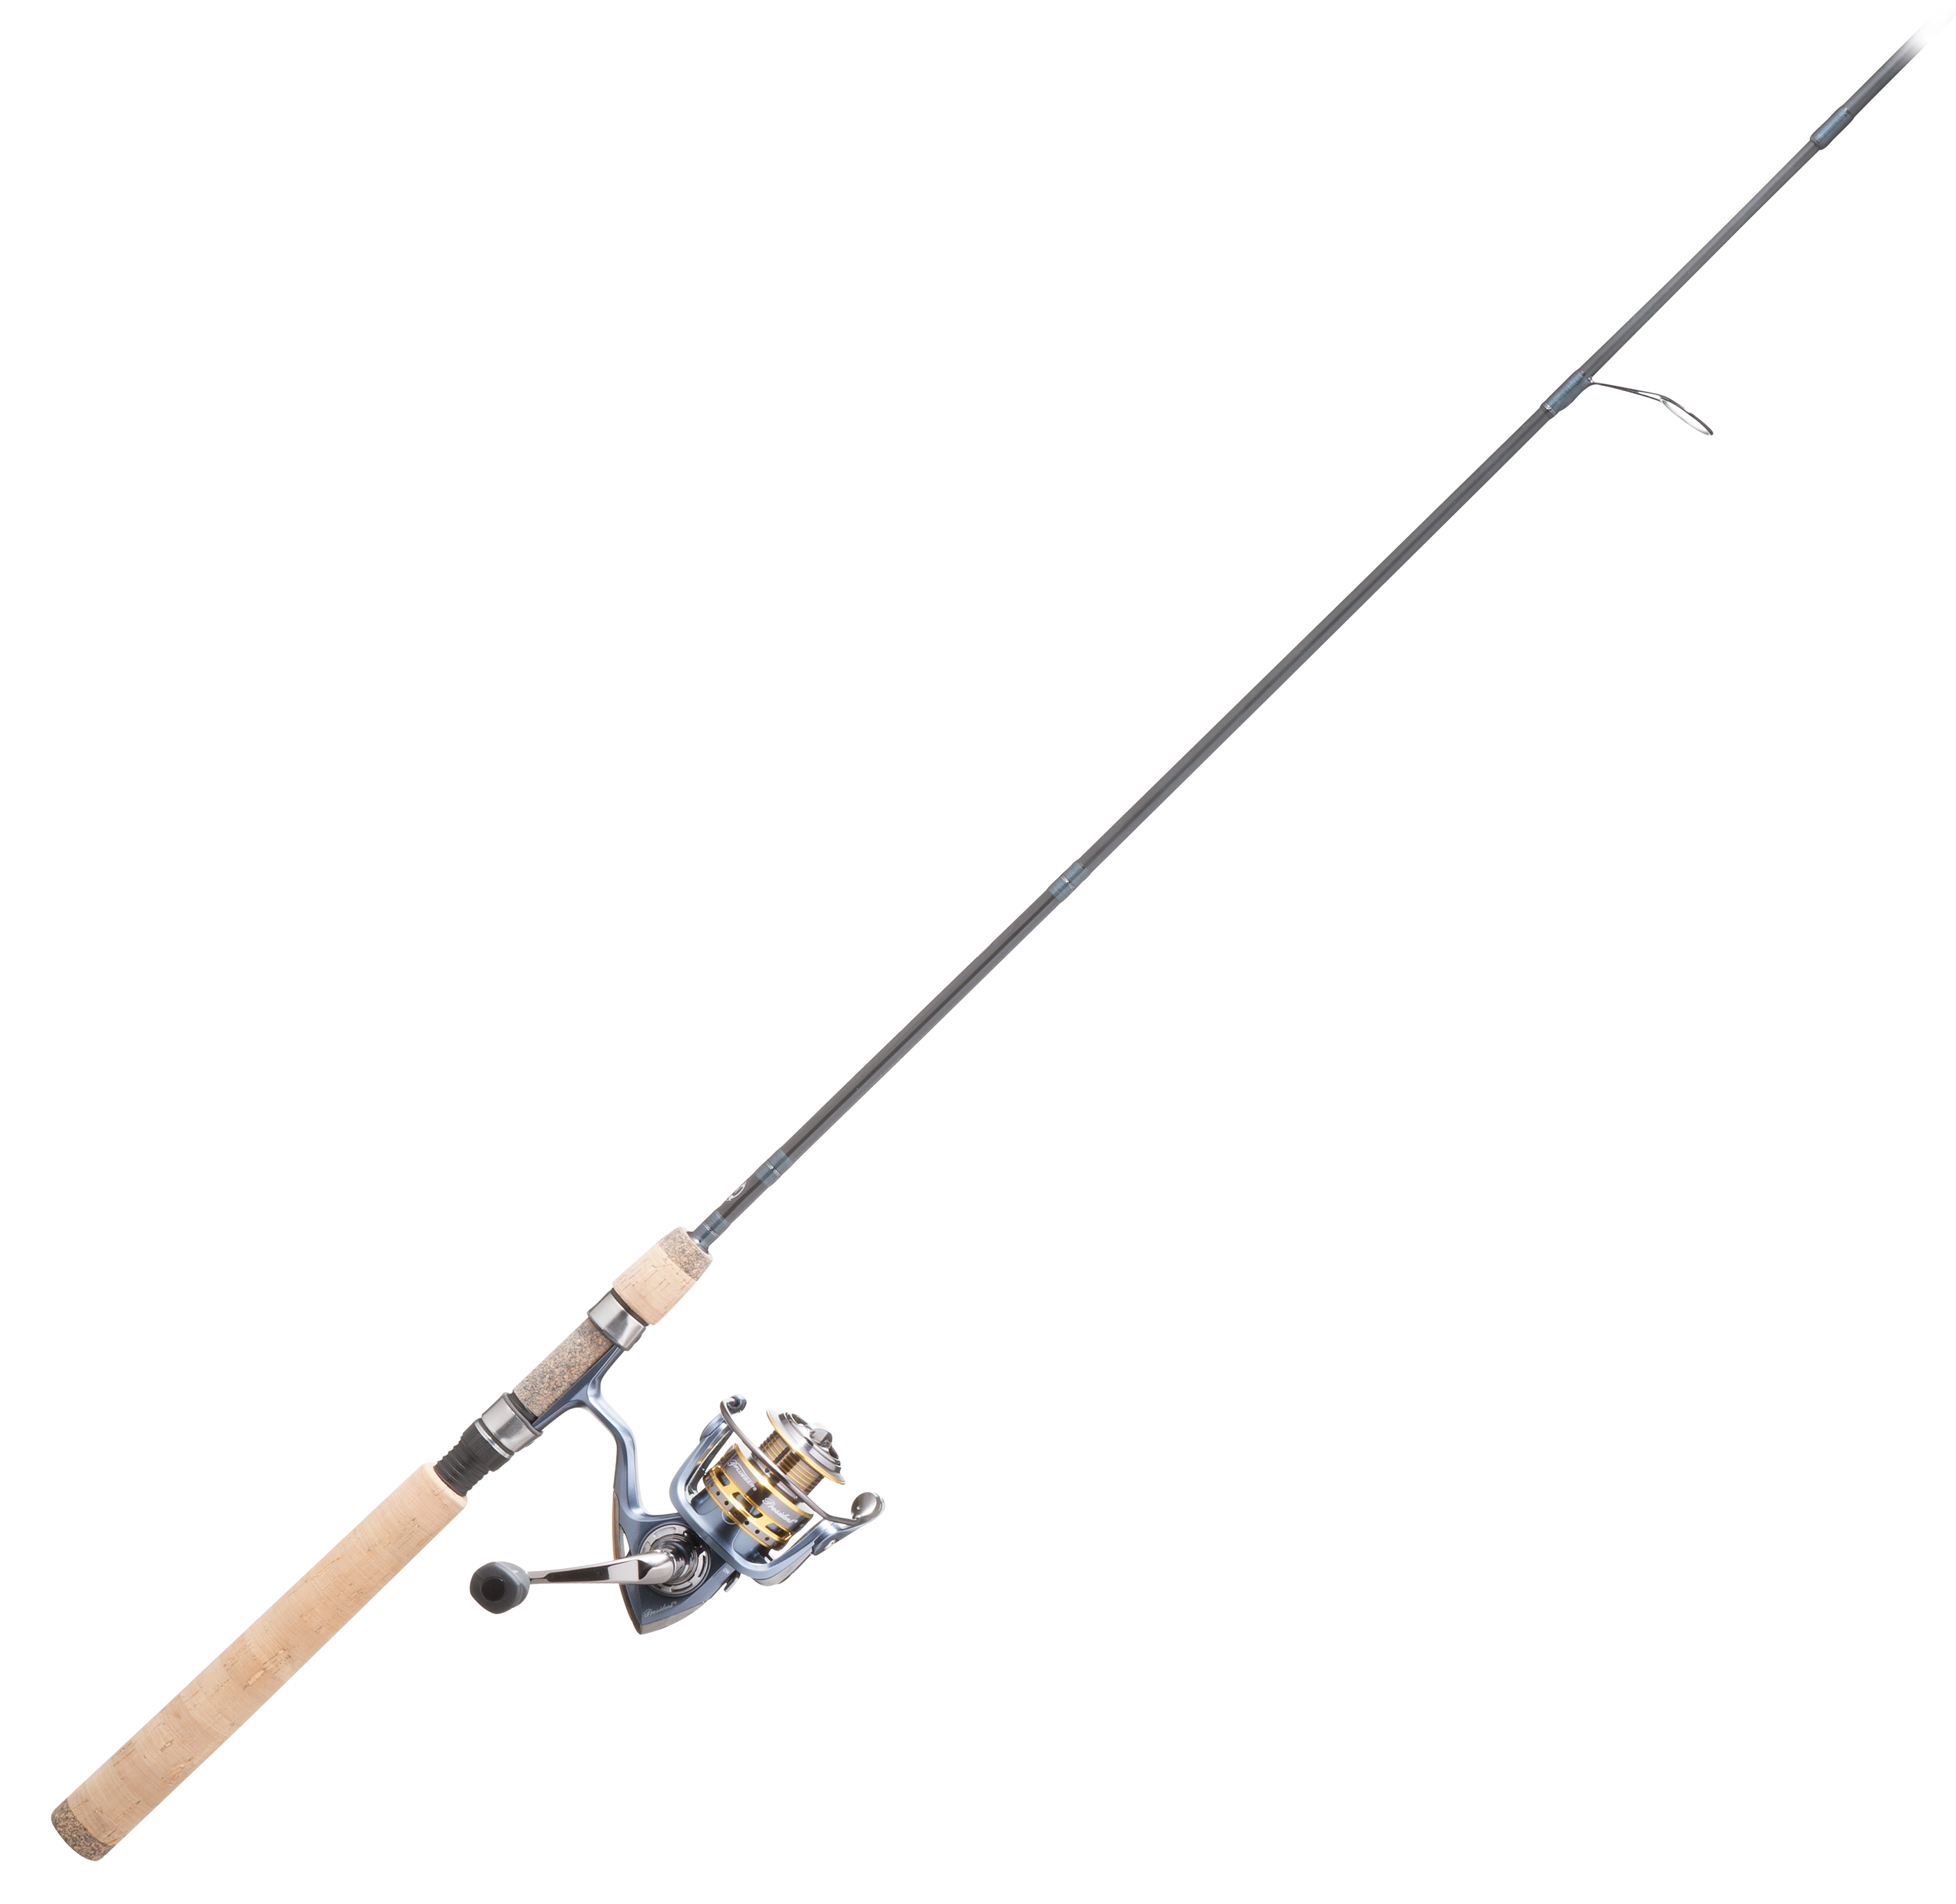 Pflueger President/Bass Pro Shops Micro Lite Spinning Rod and Reel Combo - Model PRESSP30X/MIL66MS-4